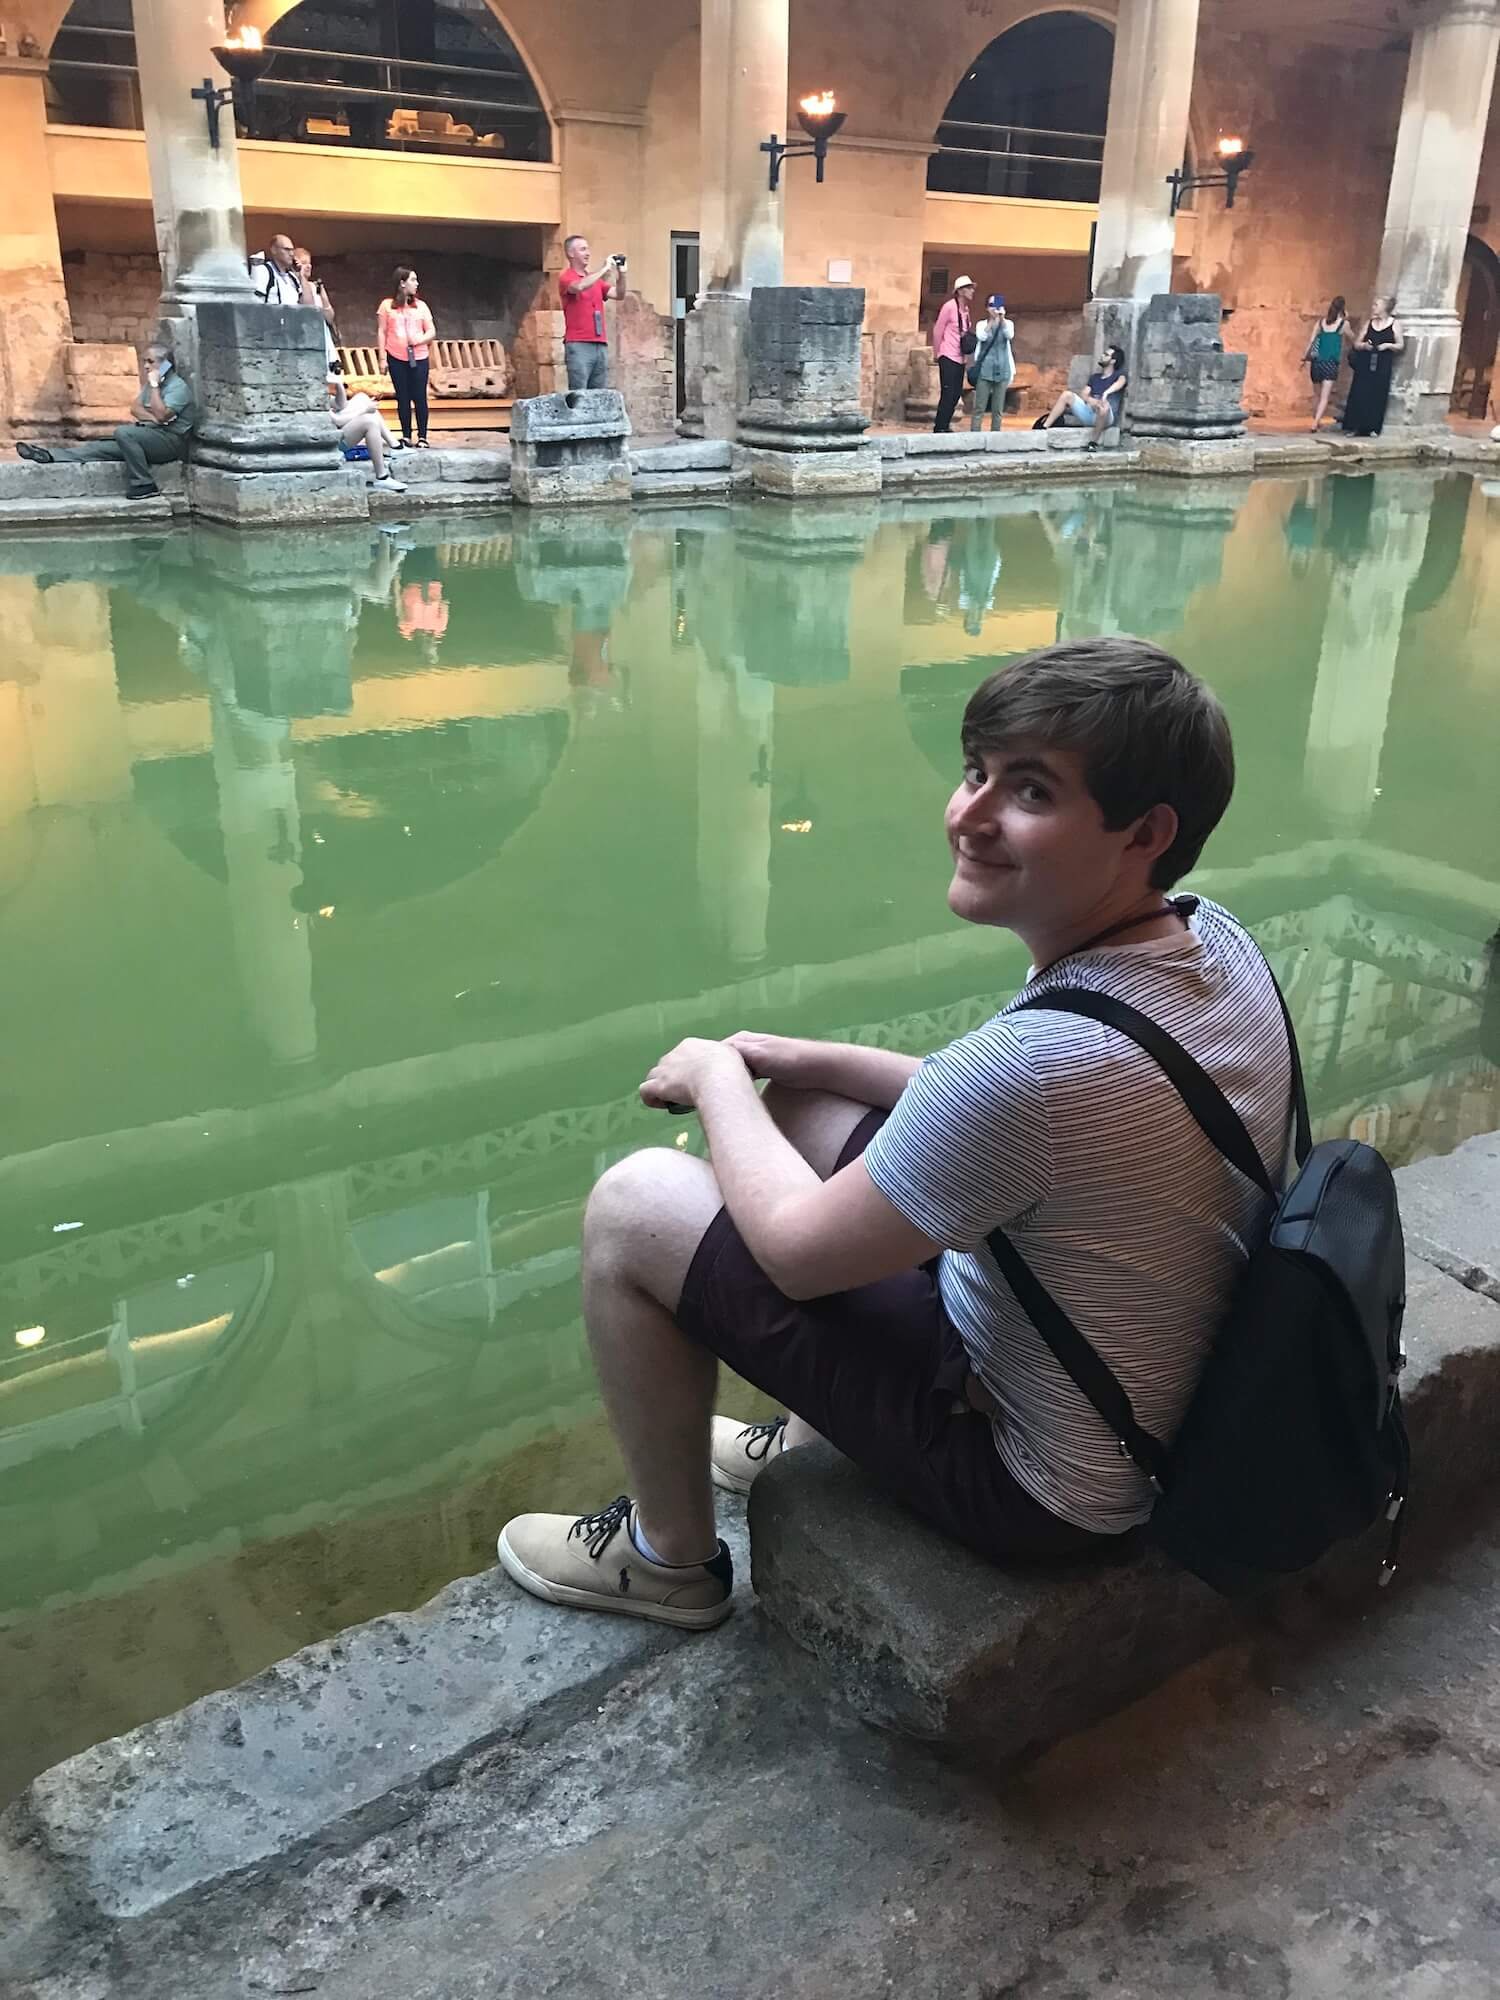 Andrew at The Roman Baths in Bath, England